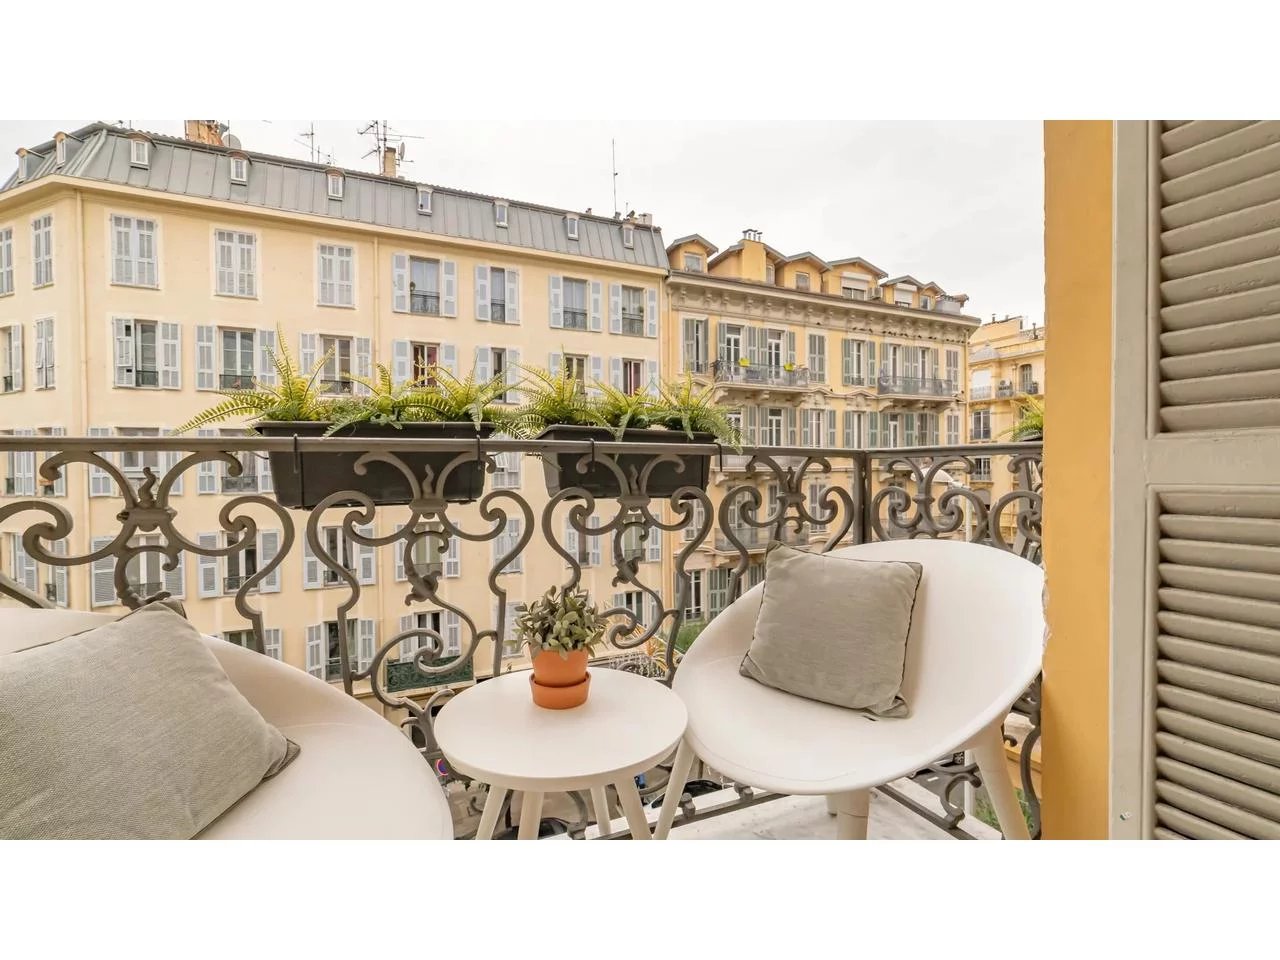 Appartement  4 Rooms 100m2  for sale   640 000 €